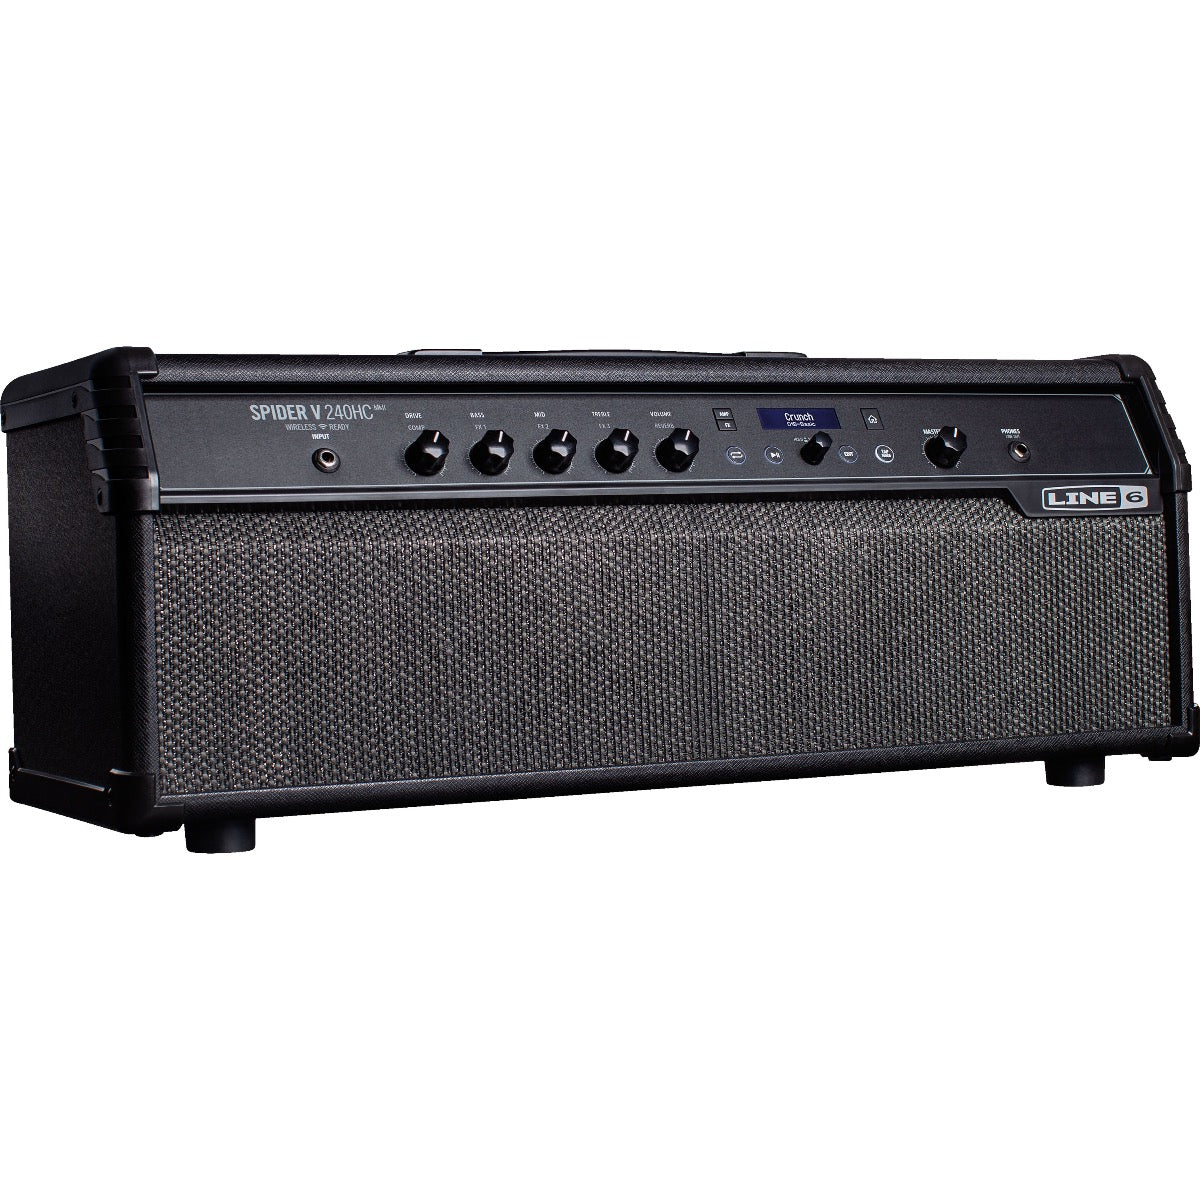 Perspective view of Line 6 Spider V 240HC MkII Guitar Amplifier showing front and left side